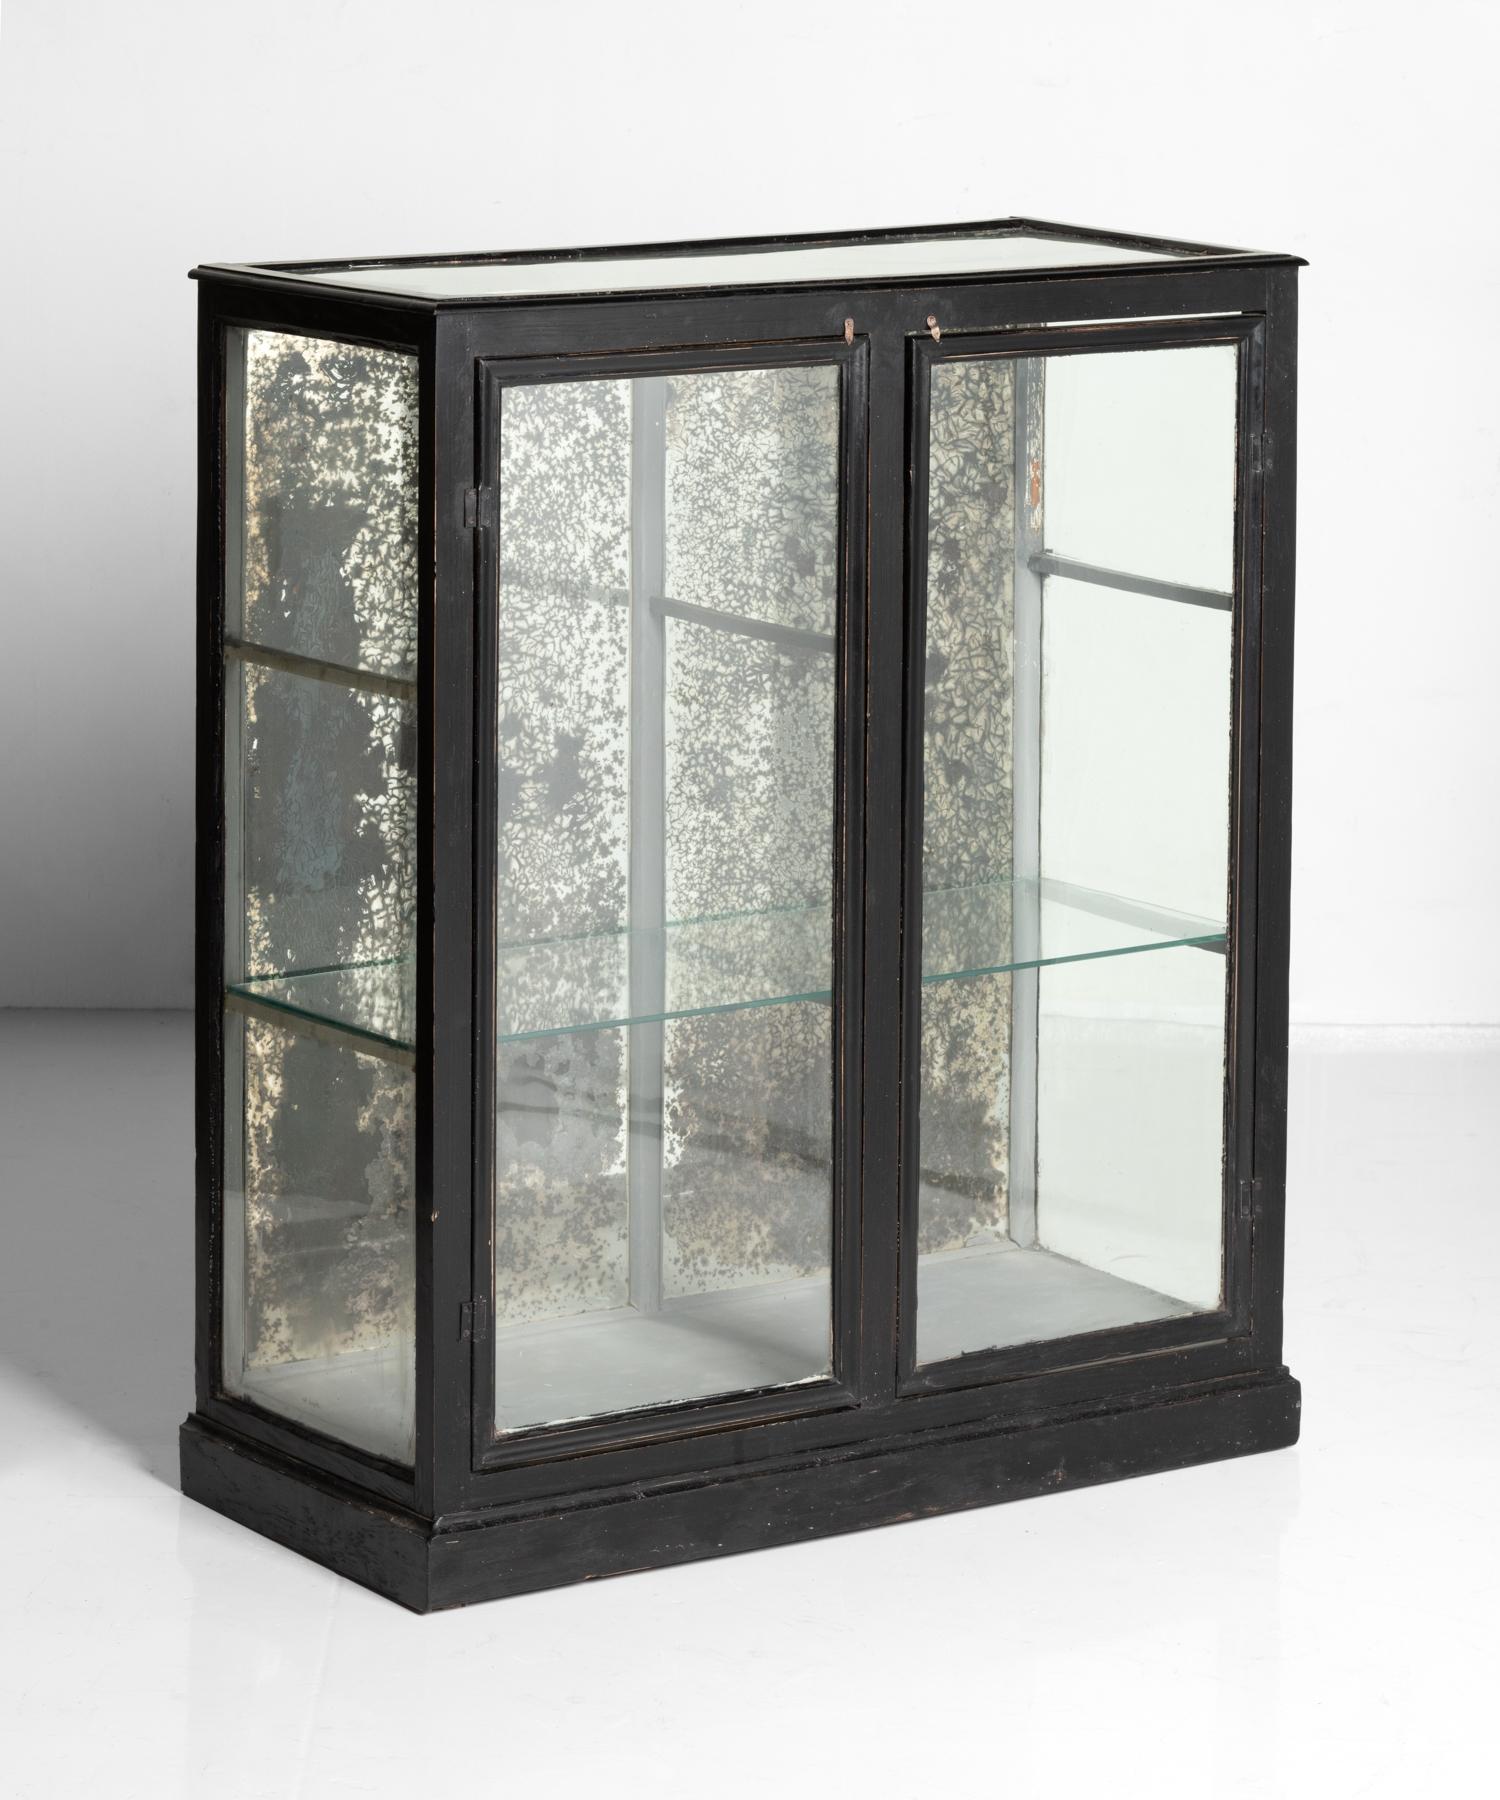 Glazed mirror back display cabinet, England, circa 1900.

Wonderfully sized ebonised form with beautifully patinated mirror back and brackets to hold two-glass shelves.